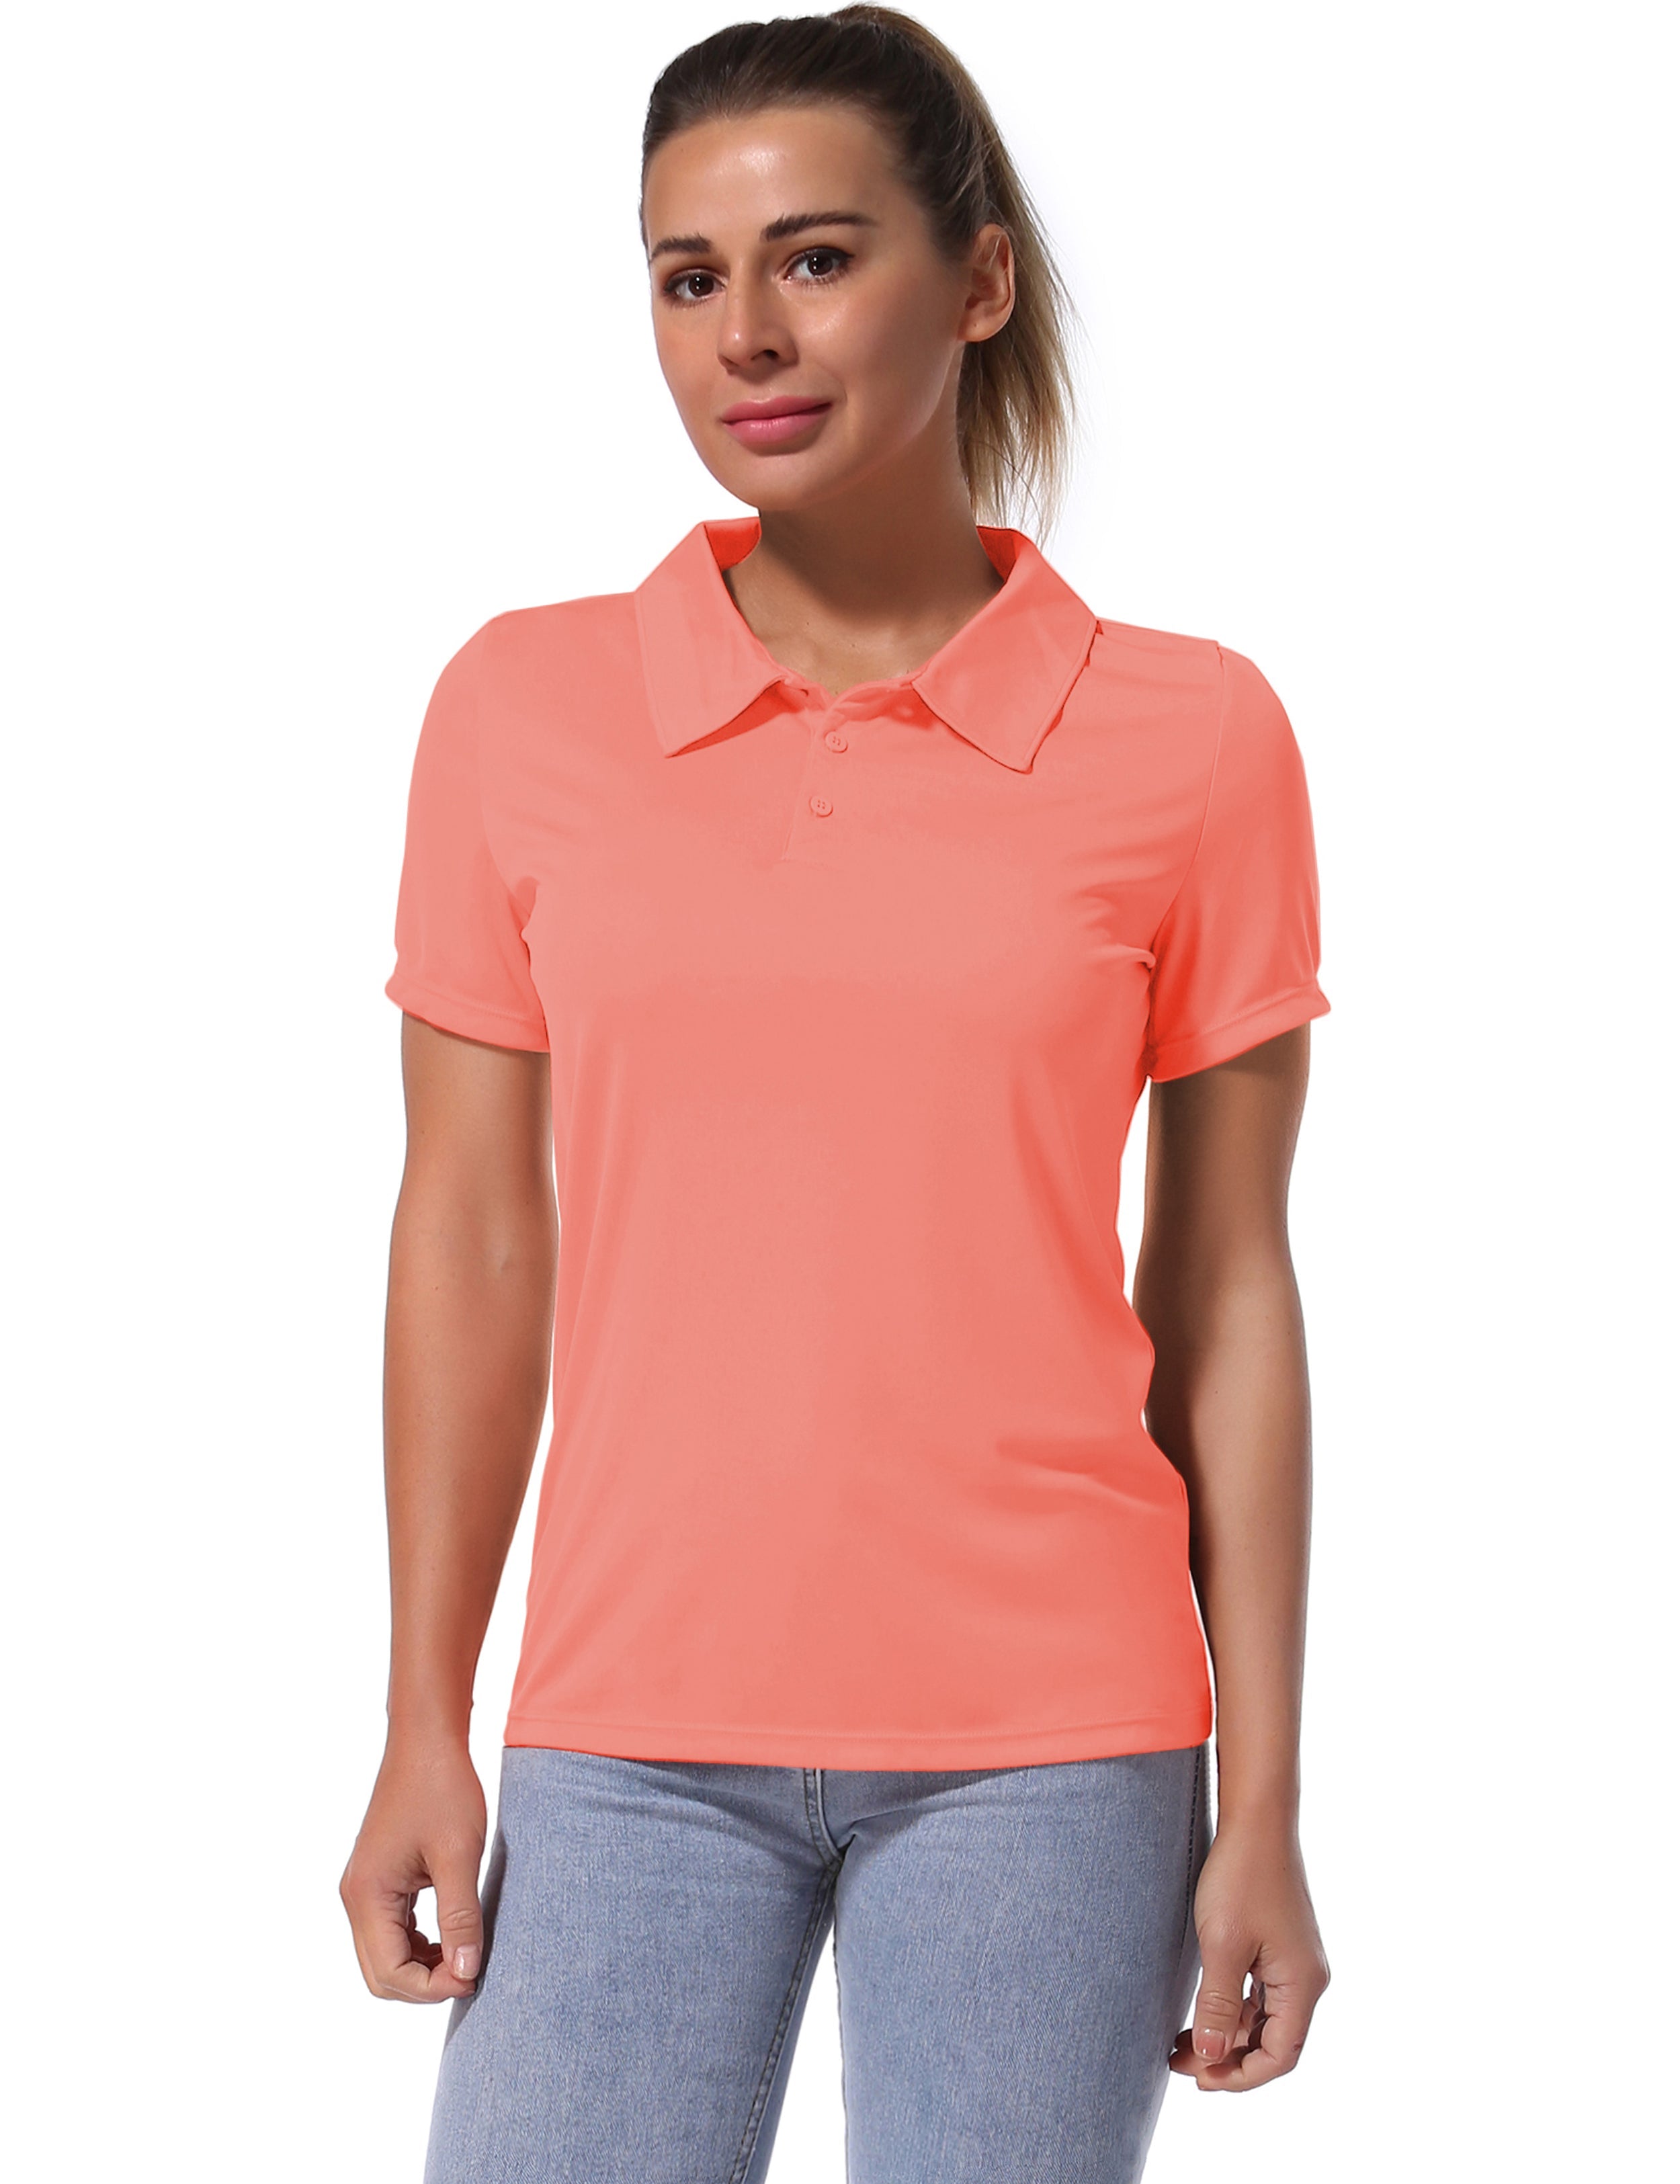 Short Sleeve Slim Fit Polo Shirt coral_Jogging